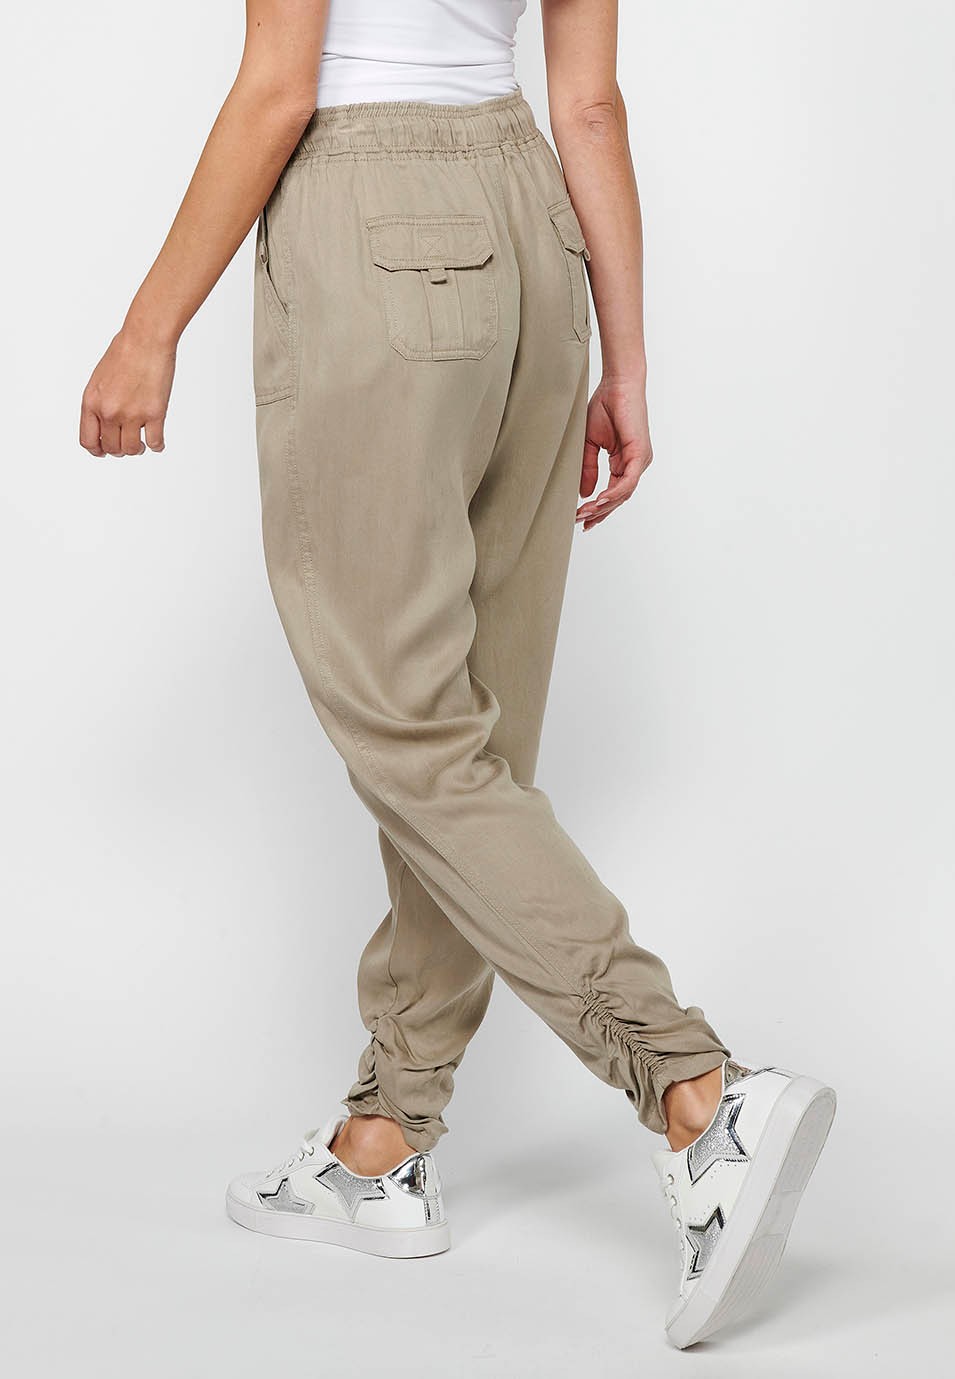 Long jogger pants with curled finish and rubberized waist with four pockets, two rear pockets with flap in Gray for Women 8